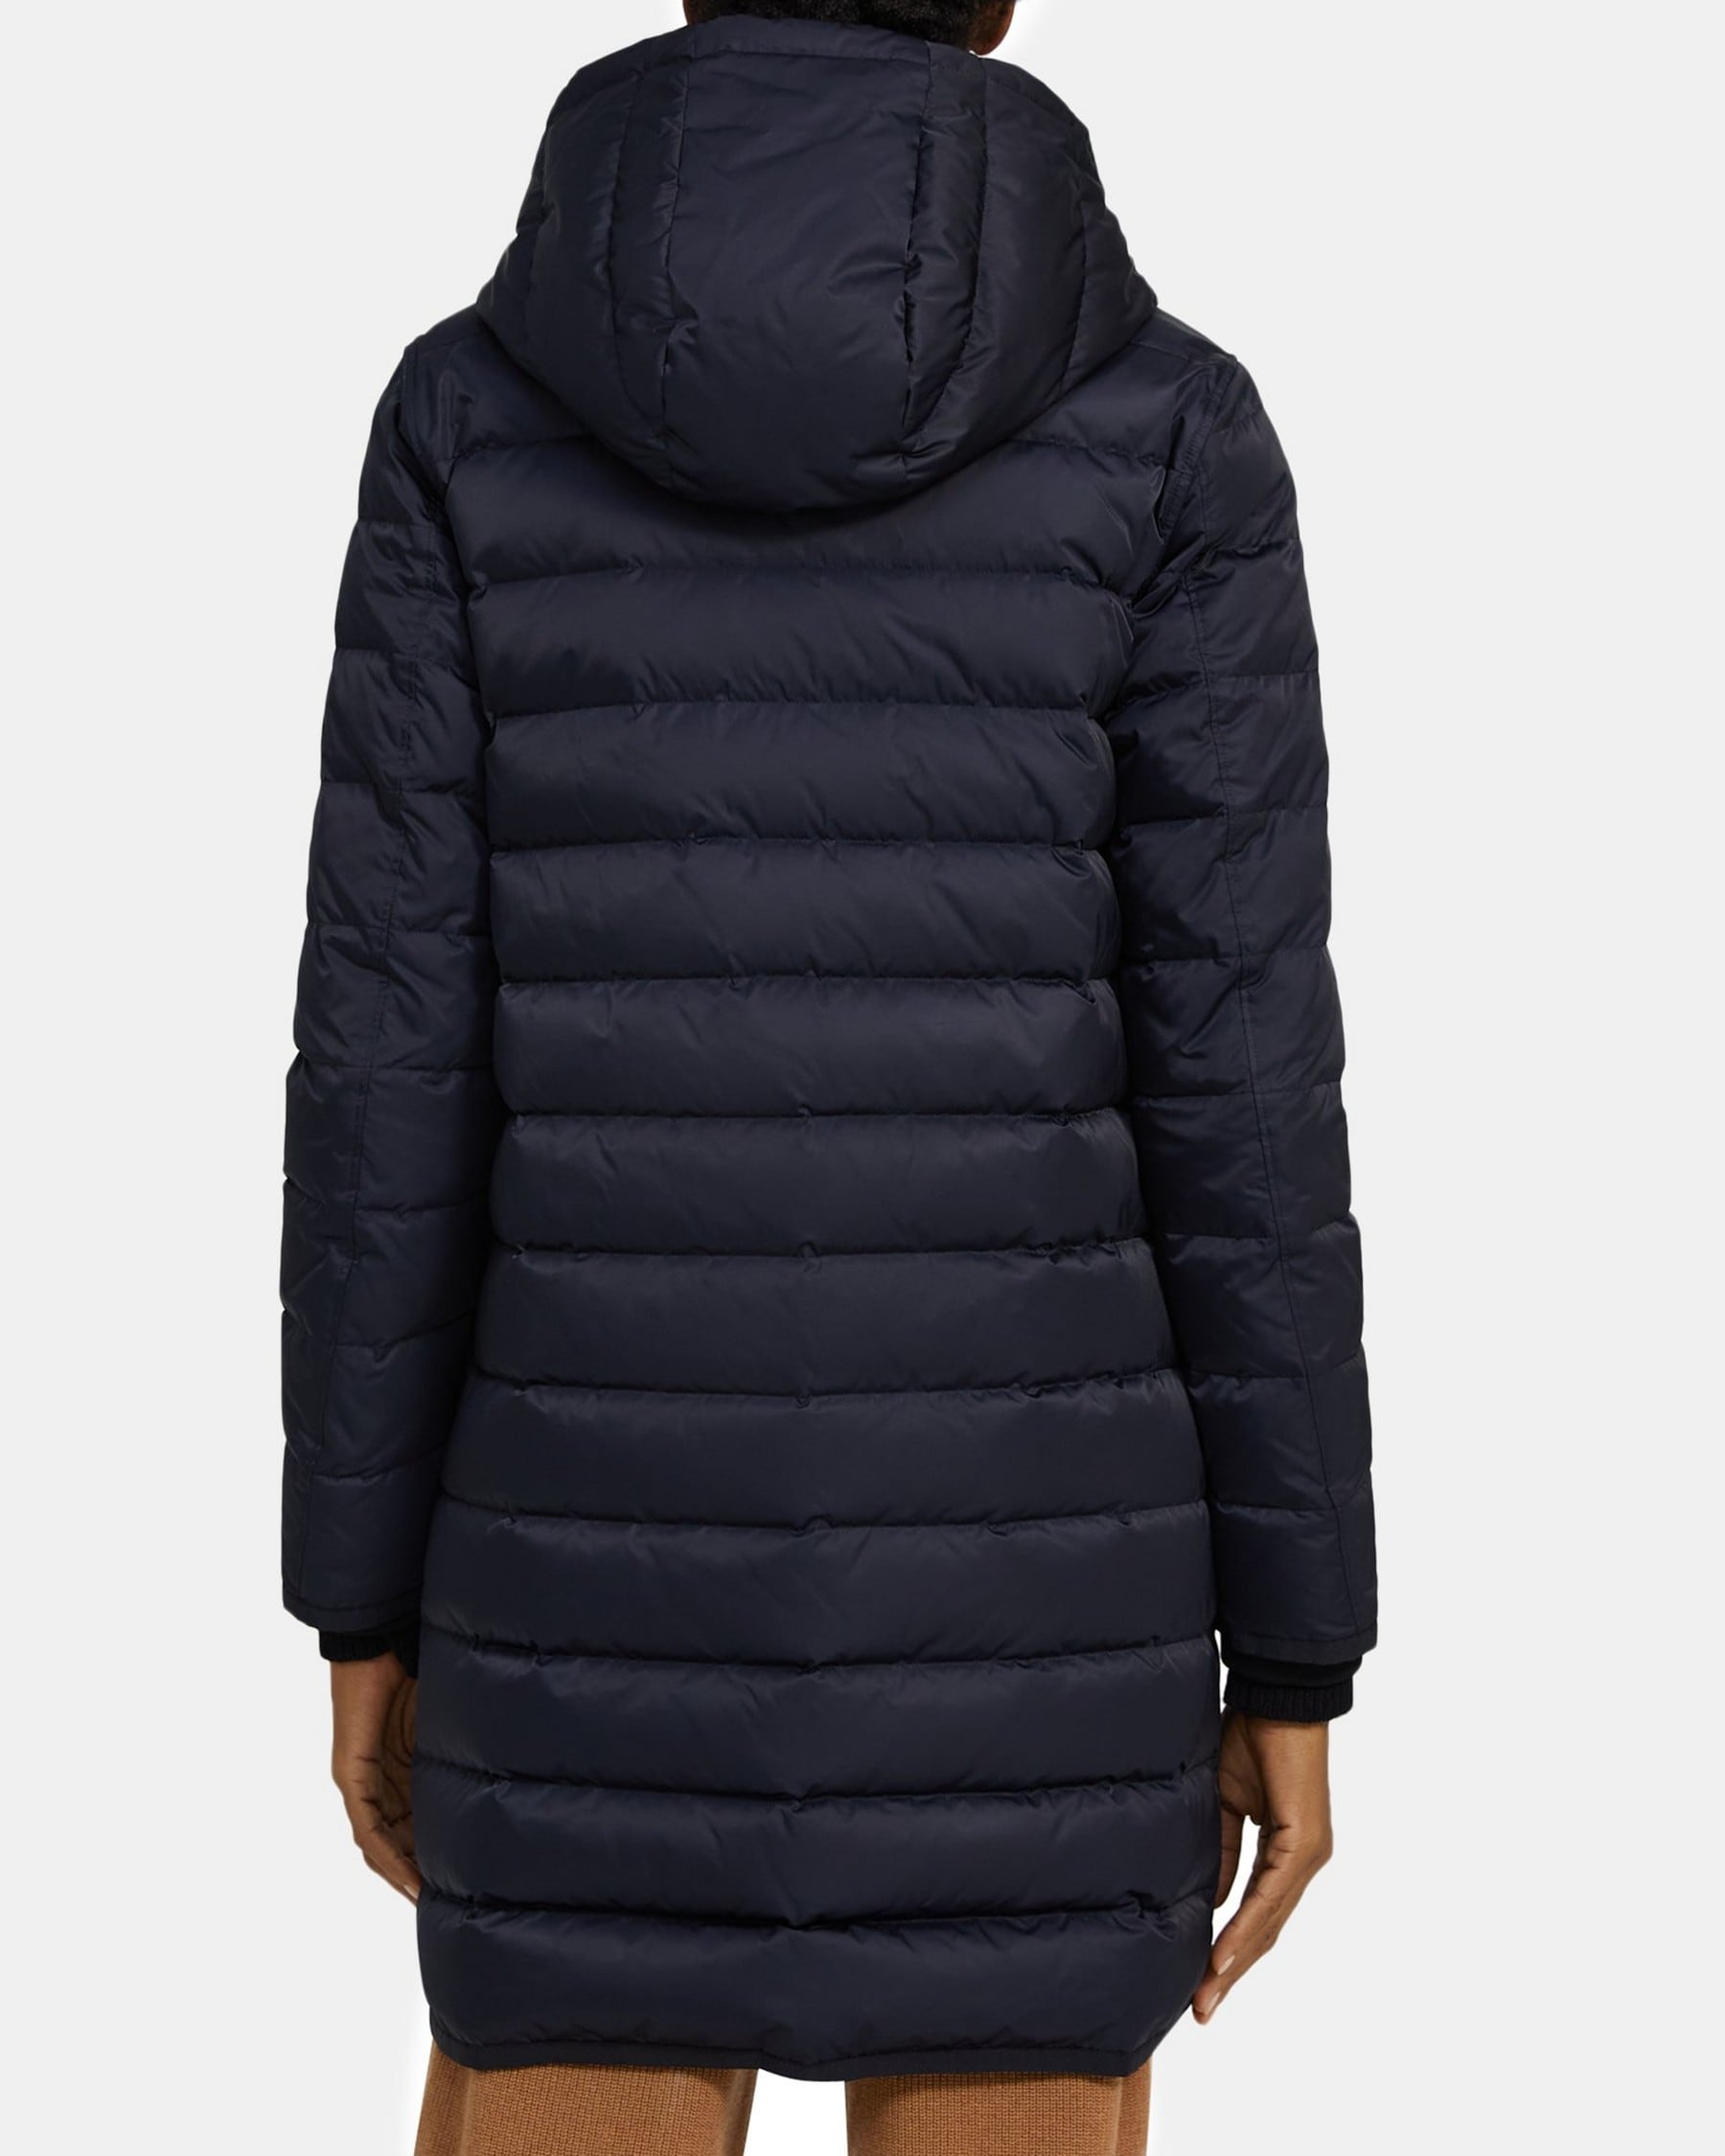 LT QUILTED JKT H